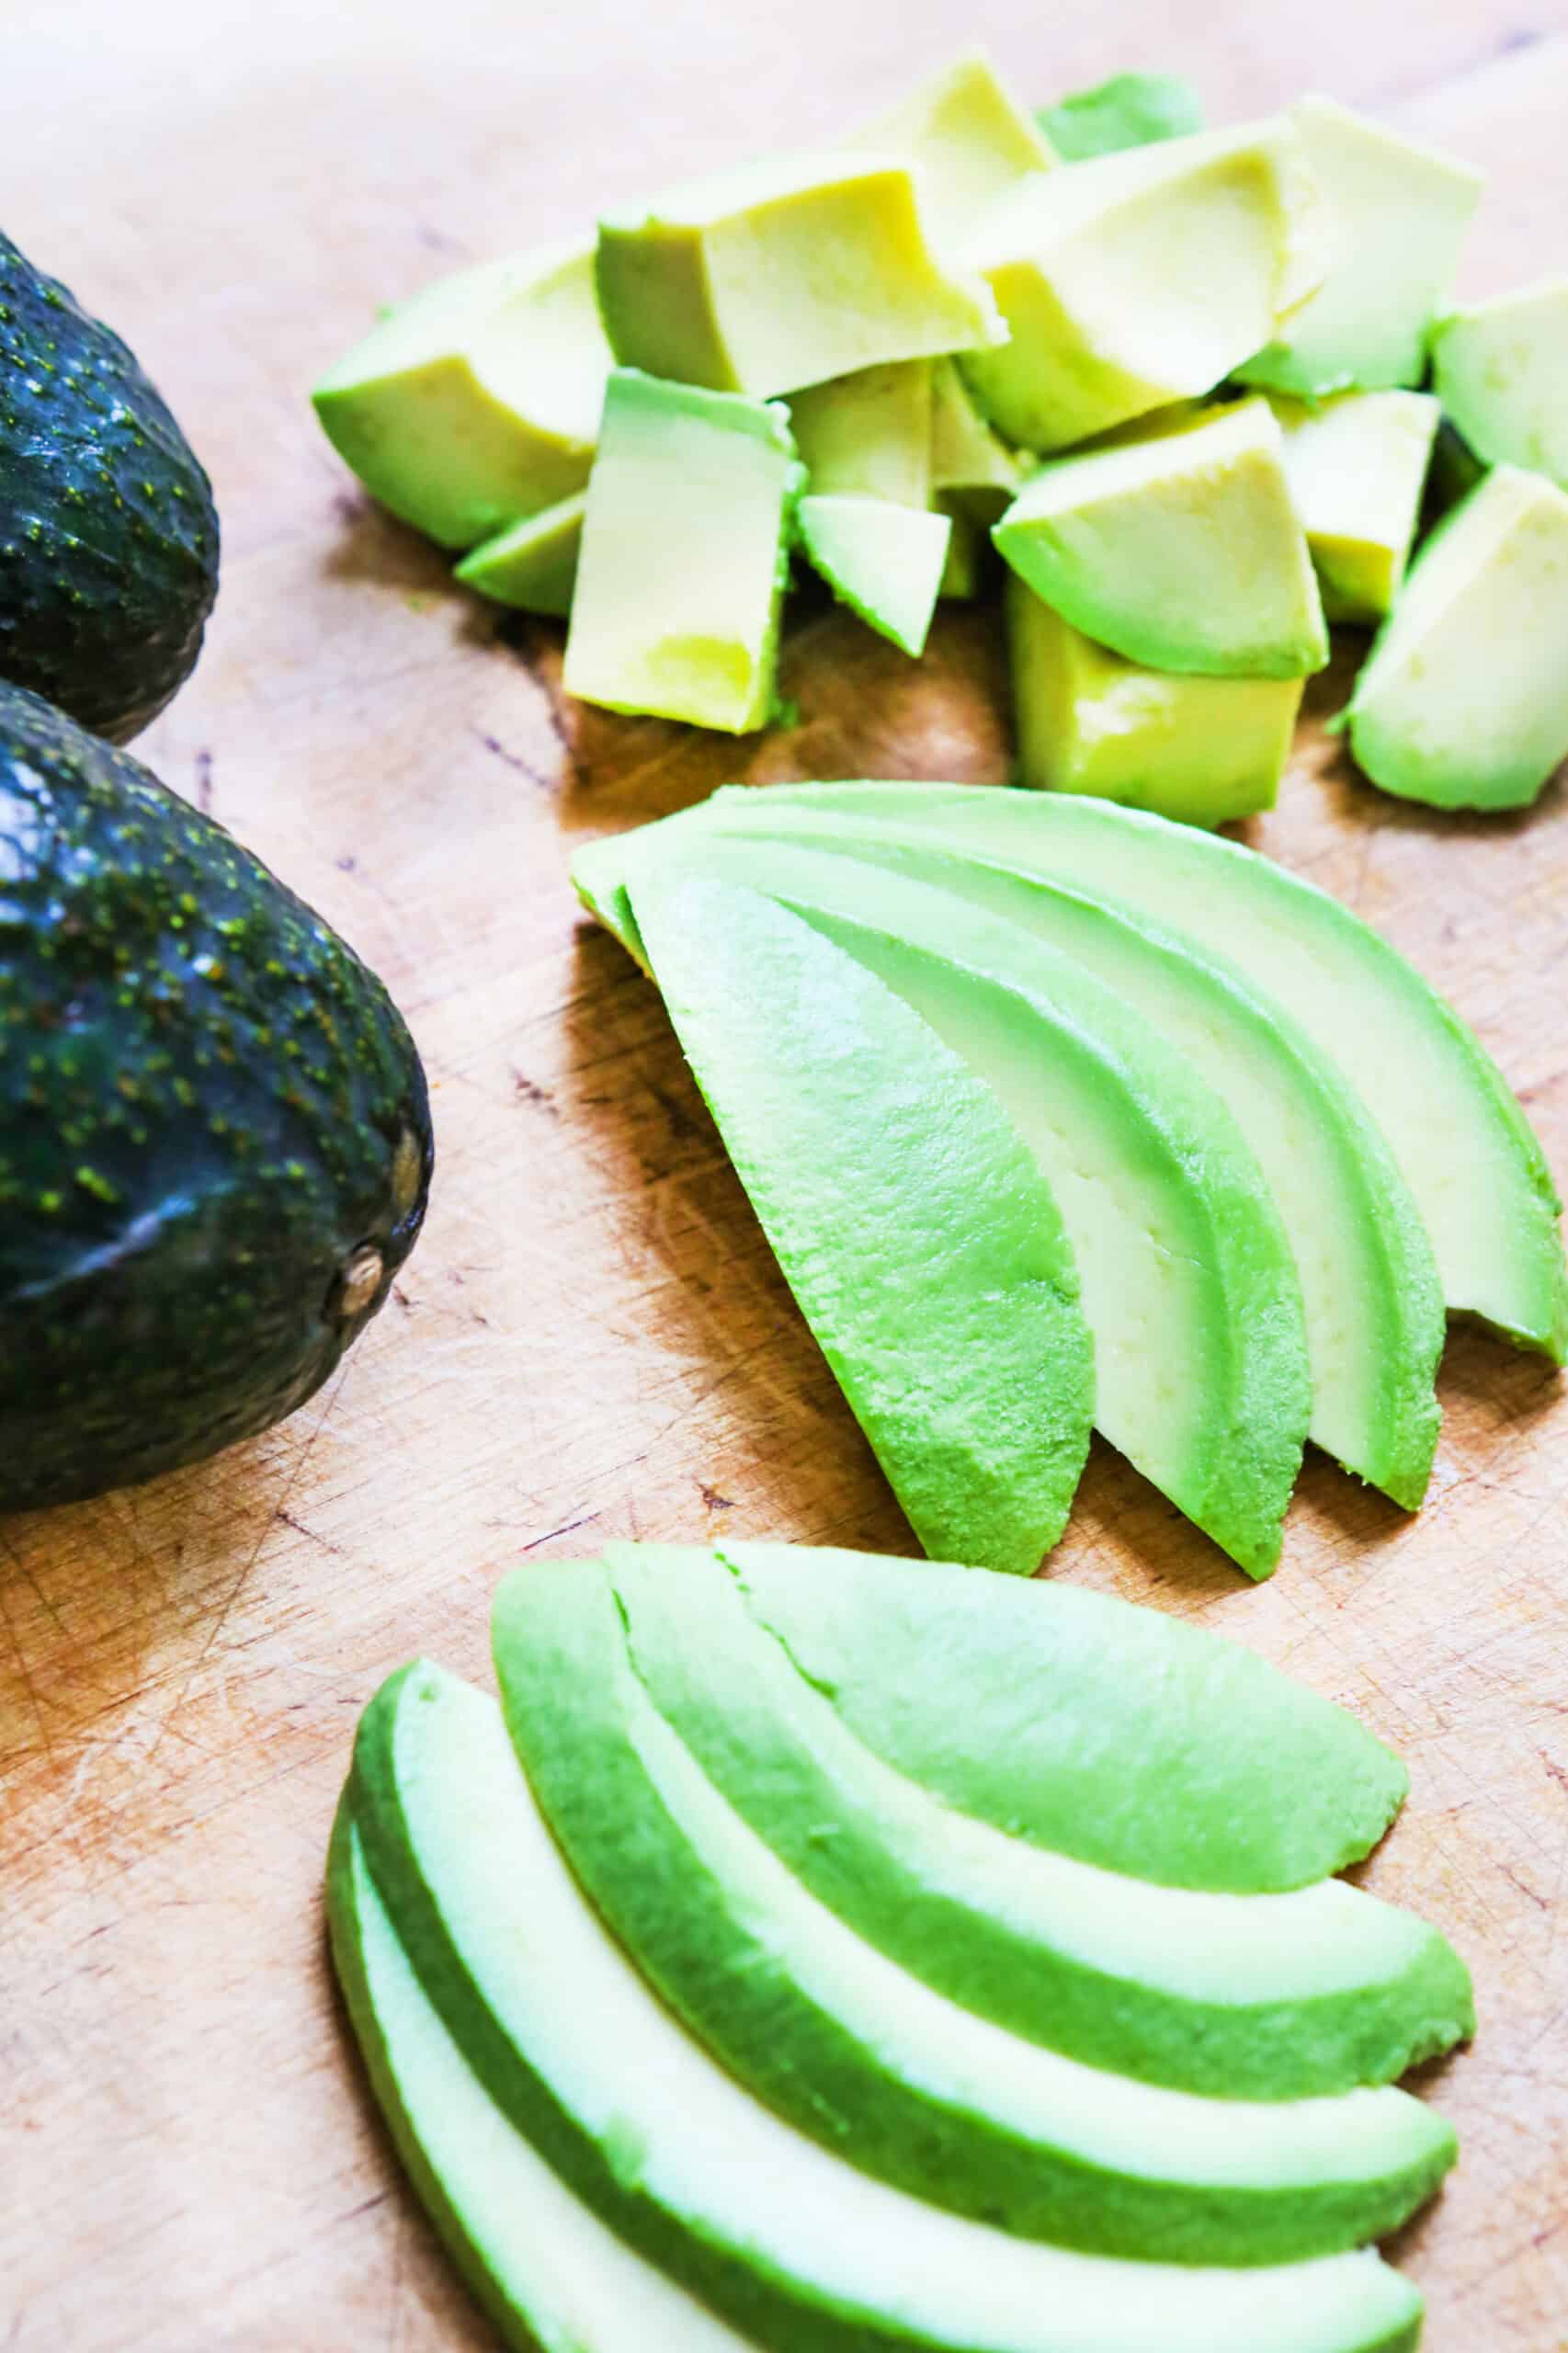 How to Cut an Avocado Properly, According to a Chef — Eat This Not That